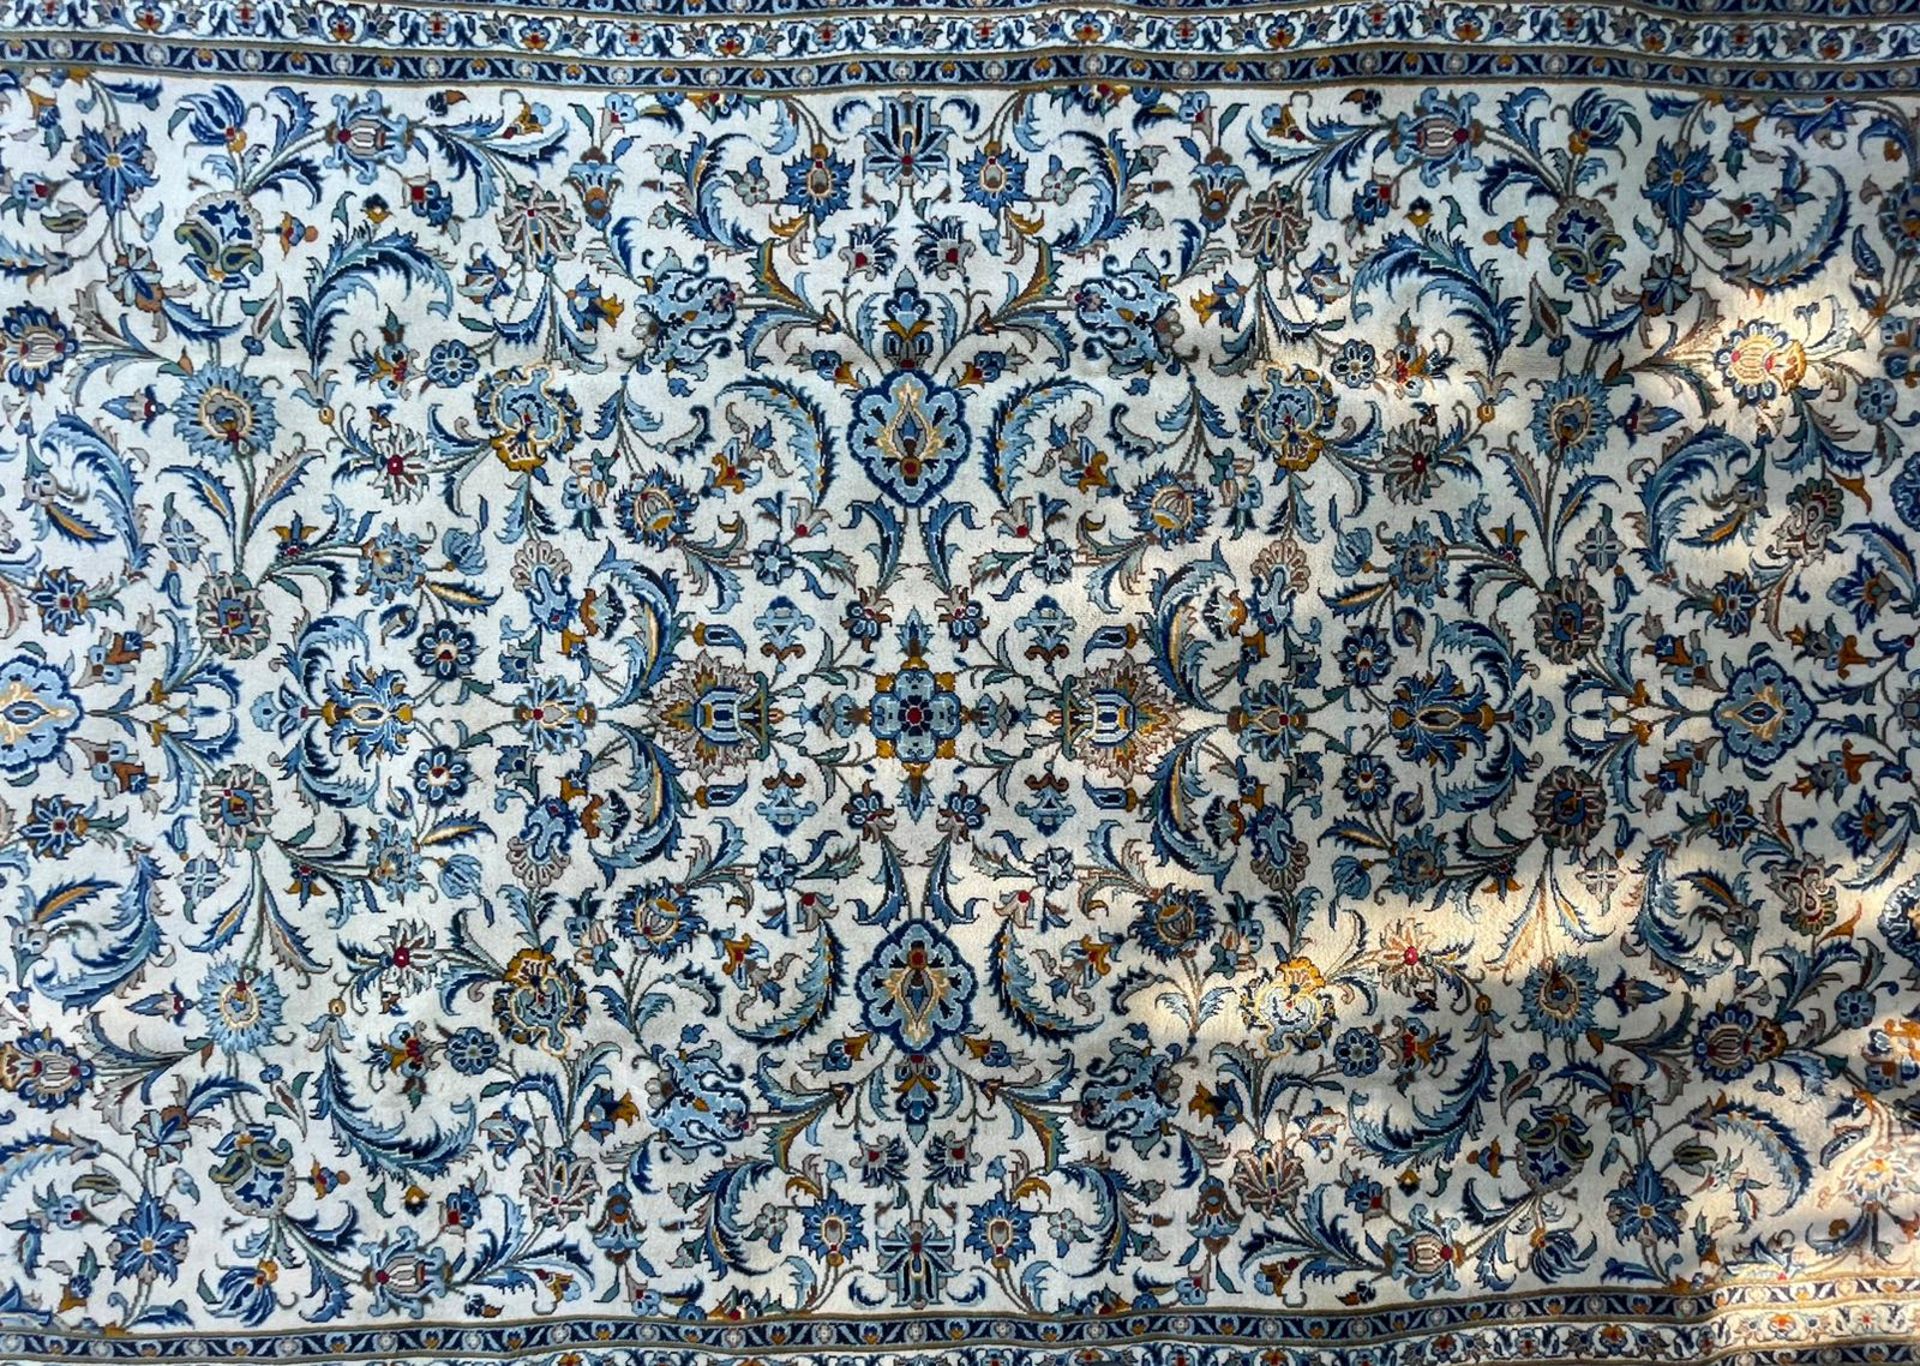 EARLY 20TH CENTURY CENTRAL PERSIAN KASHAN FLOOR CARPET RUG - Image 2 of 6